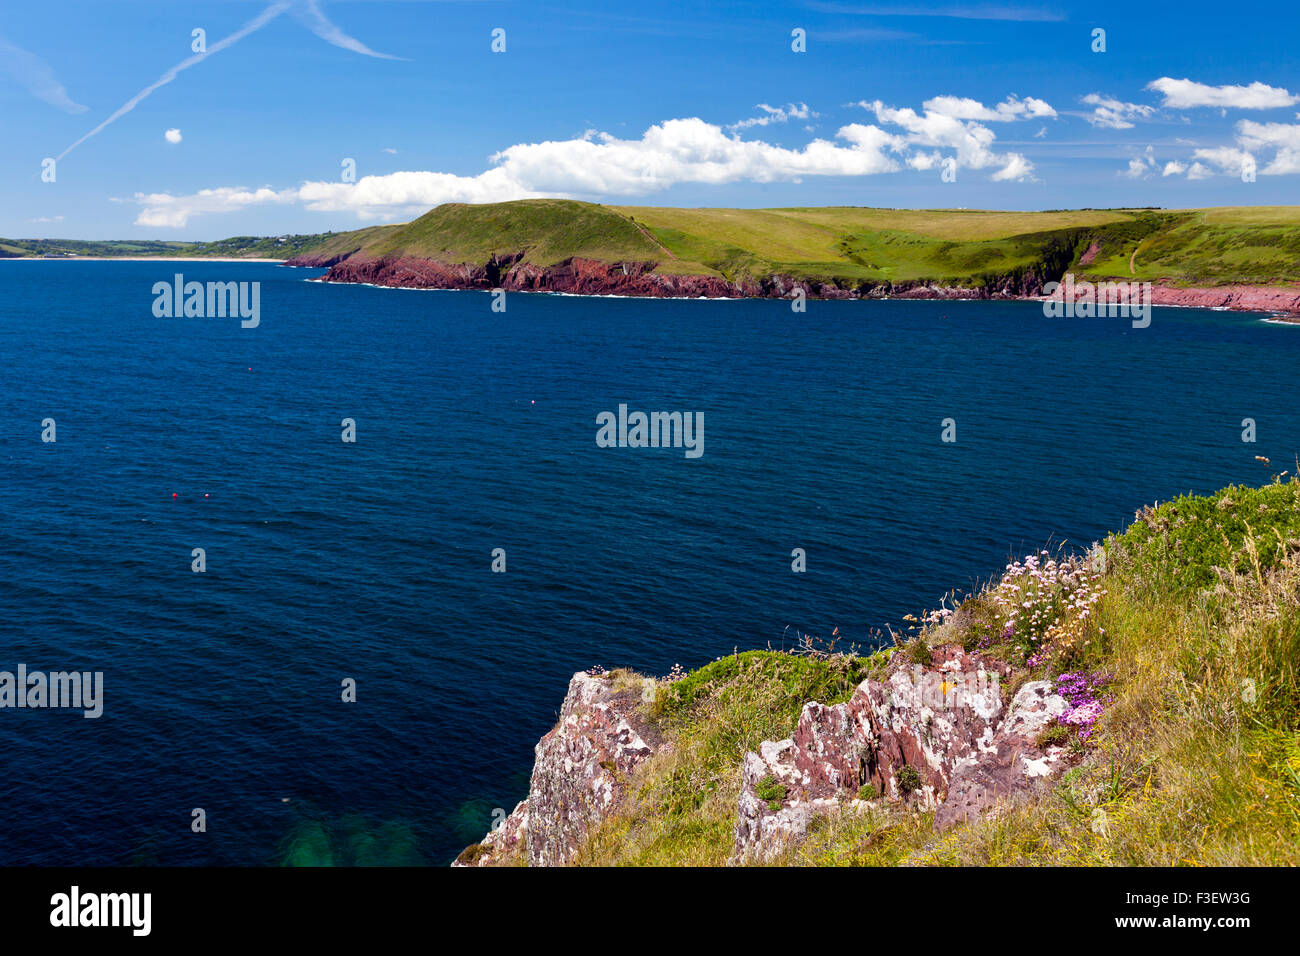 The colourful red sandstone coastline near Manorbier Bay in the Pembrokeshire Coast National Park, Wales, UK Stock Photo